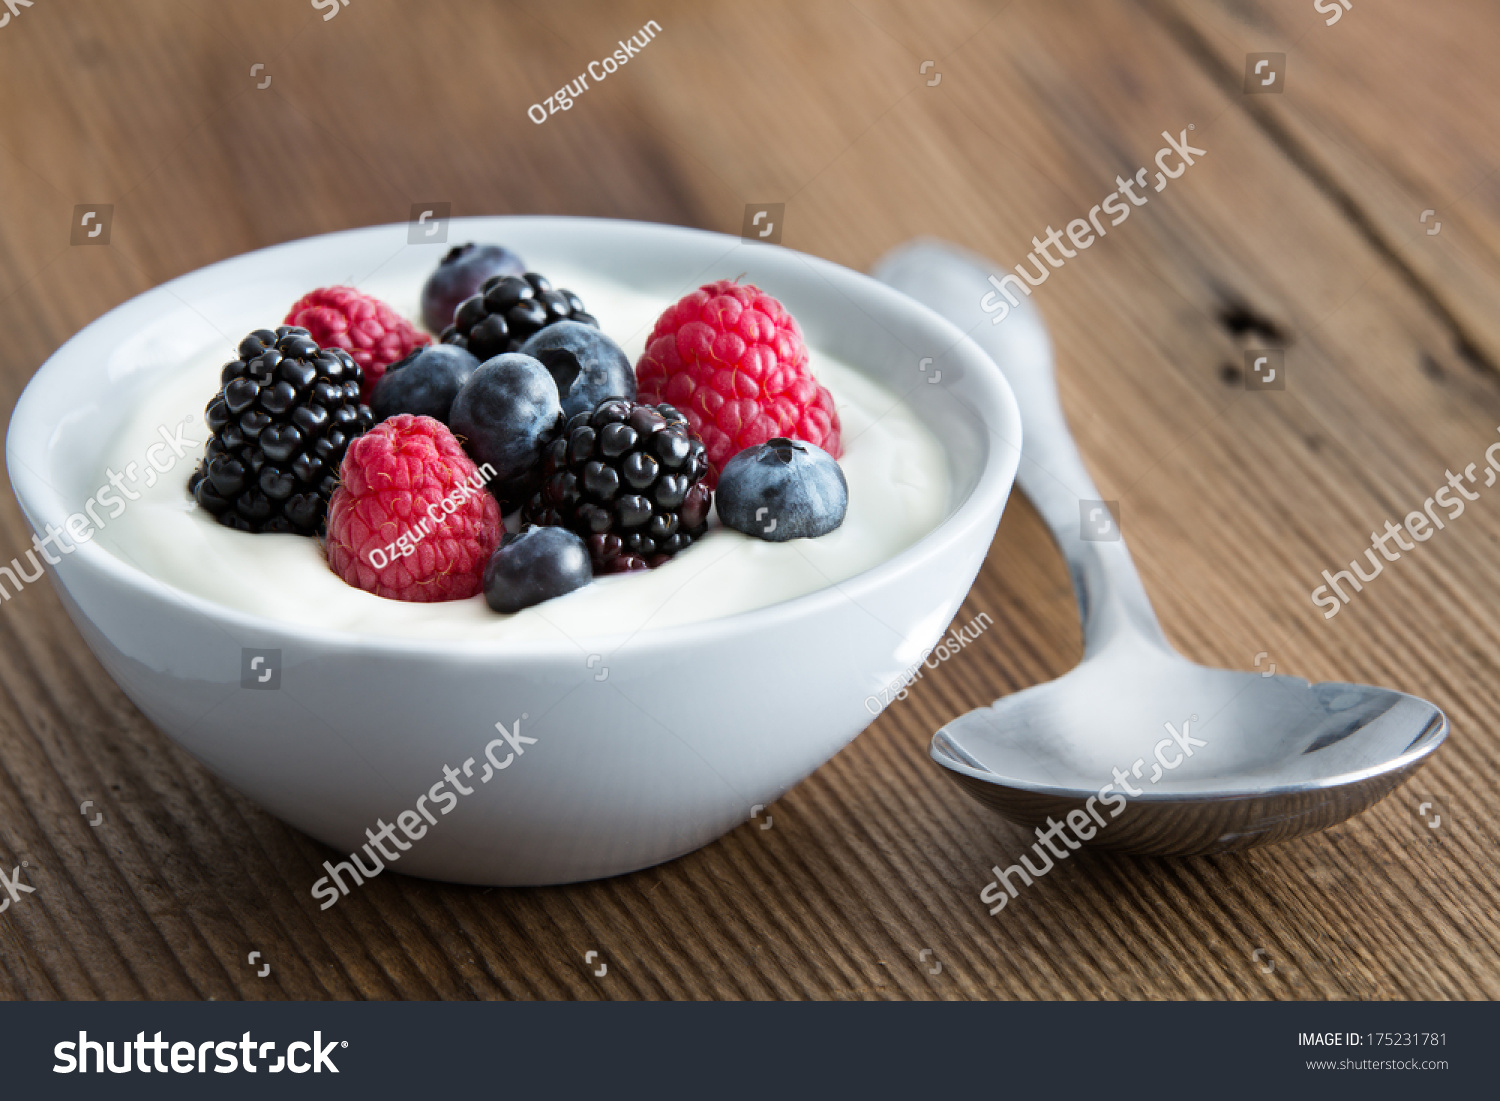 Bowl of fresh mixed berries and yogurt with farm fresh strawberries, blackberries and blueberries served on a wooden table #175231781